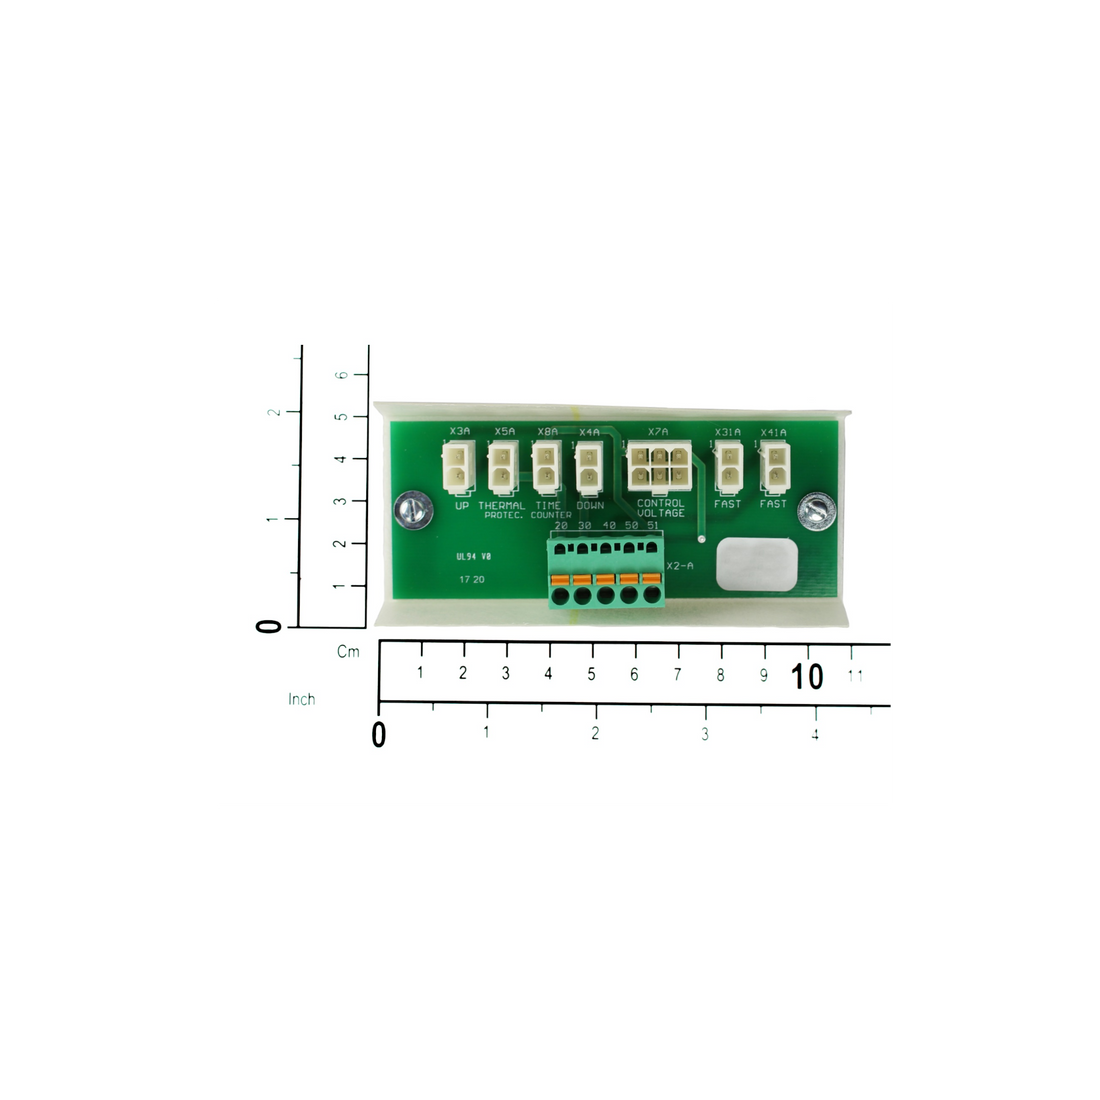 R&M Parts - Terminal Board, Part Number: 3000006801